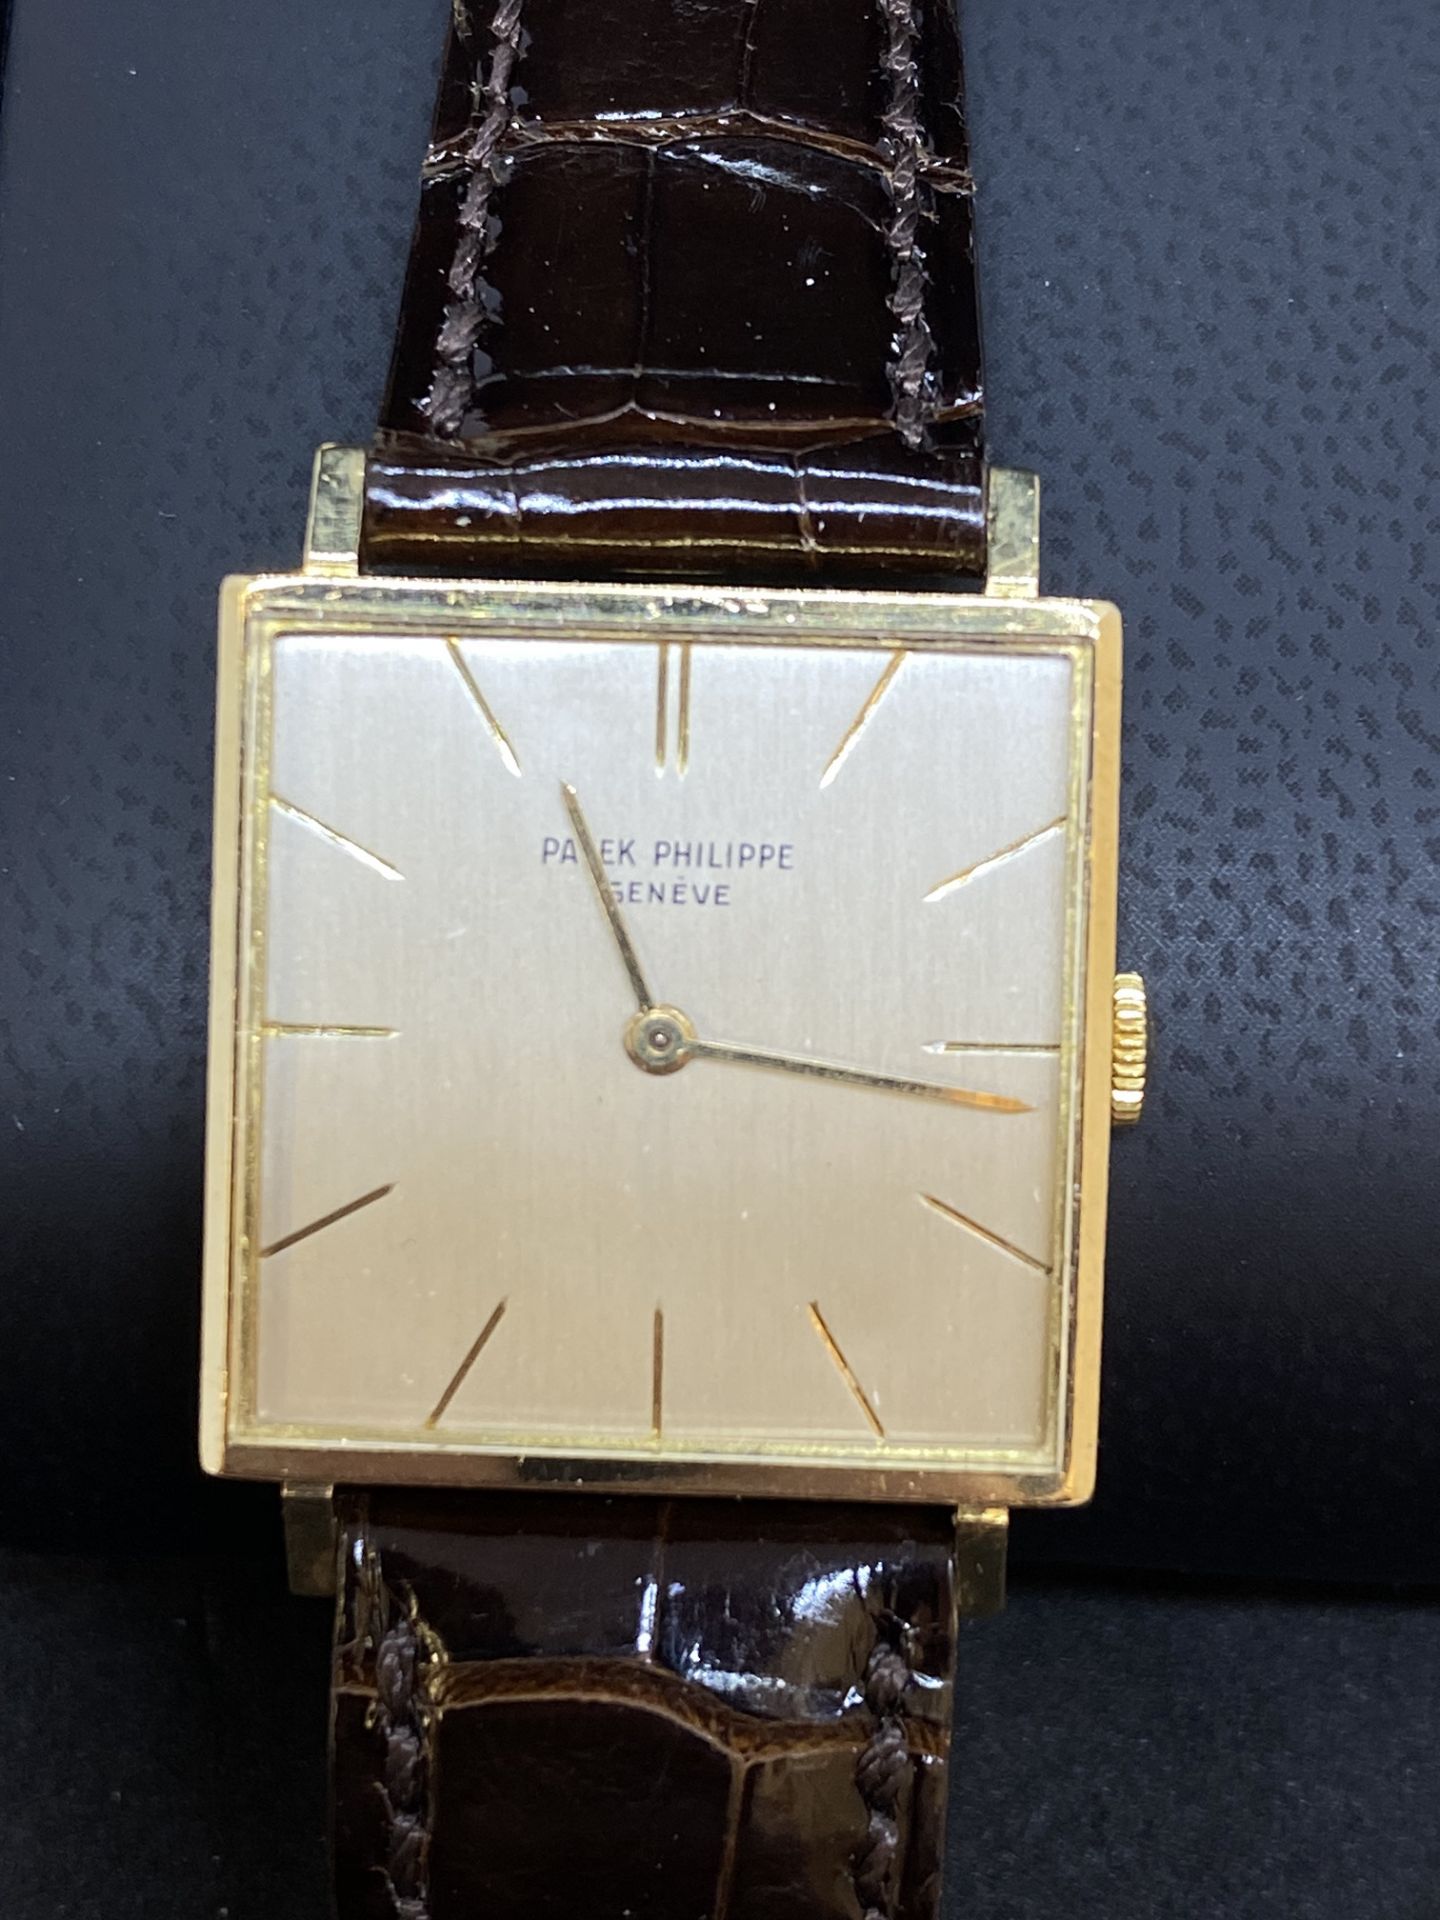 LOVELY VINTAGE 1963 PATEK PHILIPPE 18ct GOLD WATCH - Image 2 of 7